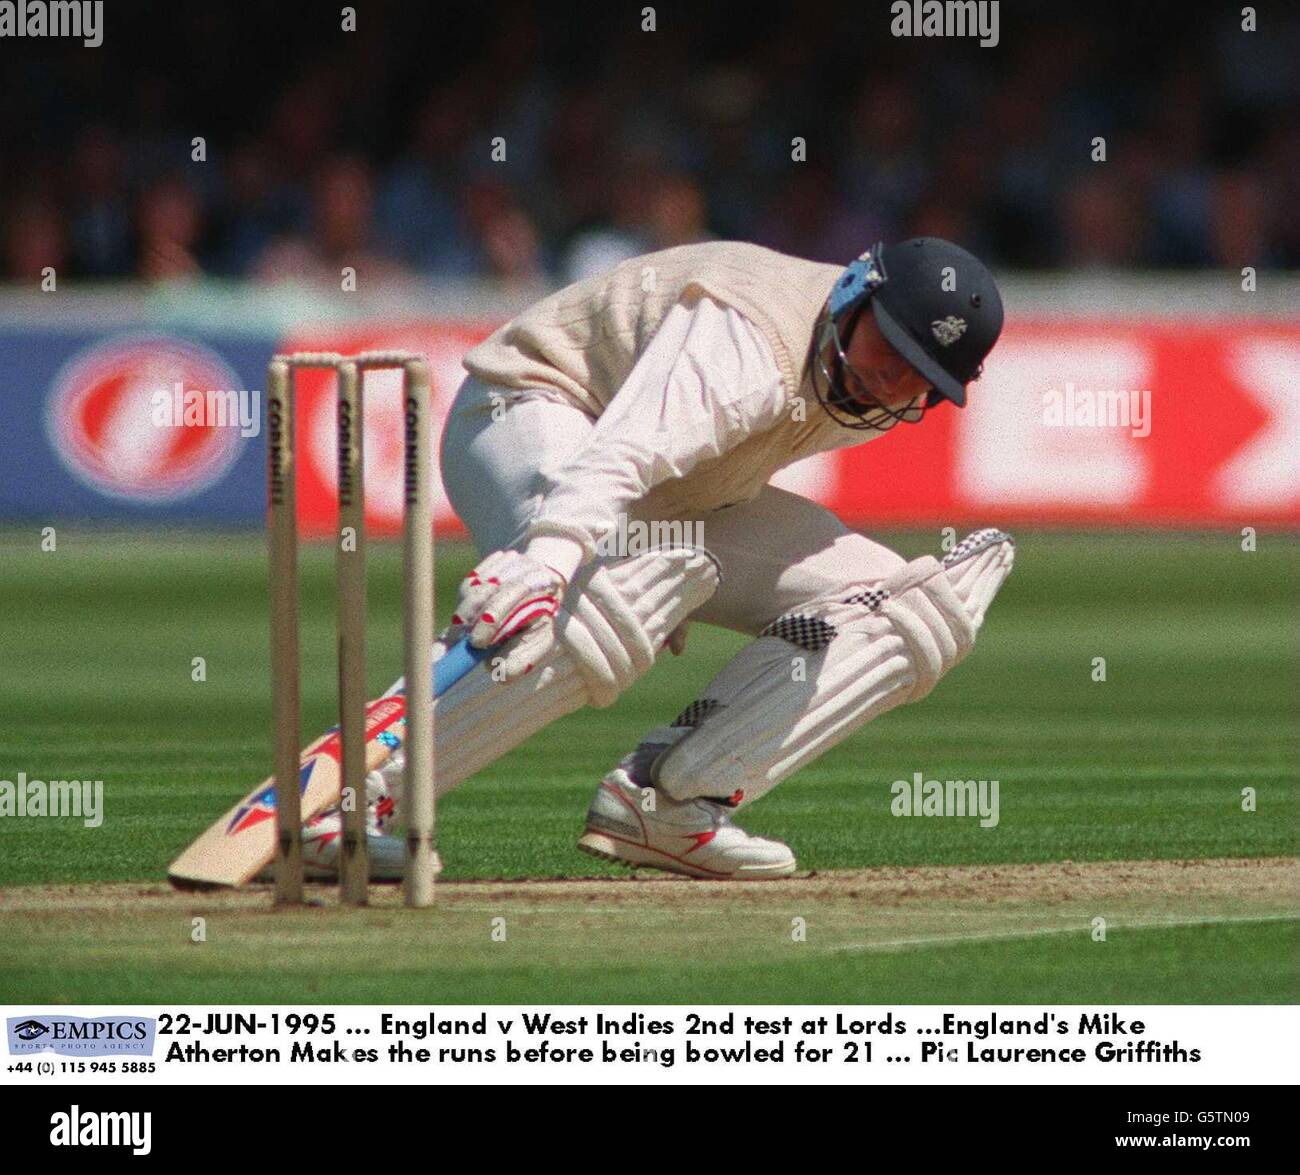 22-JUN-1995. England v West Indies 2nd test at Lords .England's Mike Atherton Makes the runs before being bowled for 21 Stock Photo